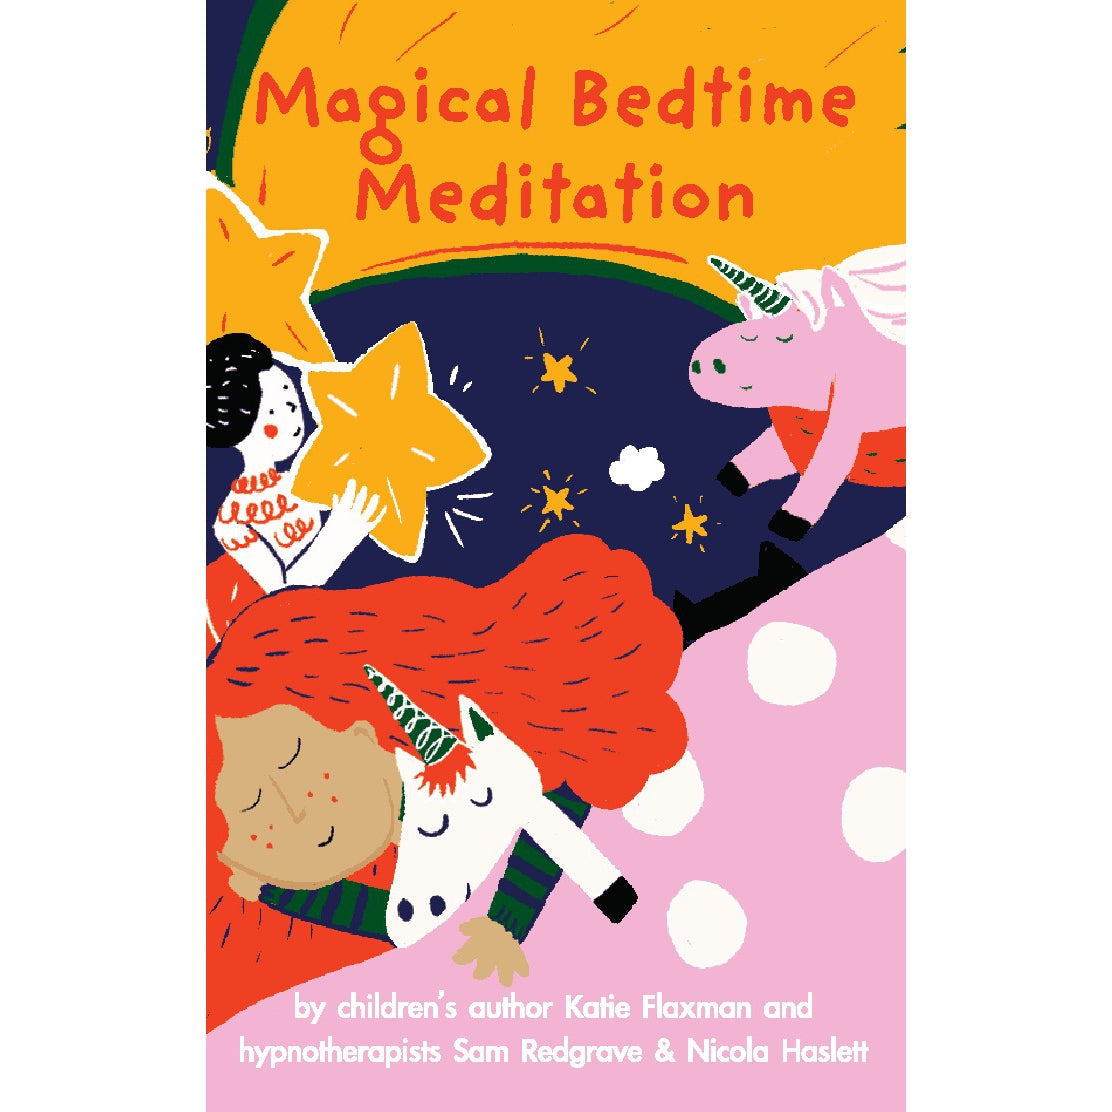 Yoto Card - Magical Bedtime Meditation - Child Friendly Audio Mindfulness Card for the Yoto Player